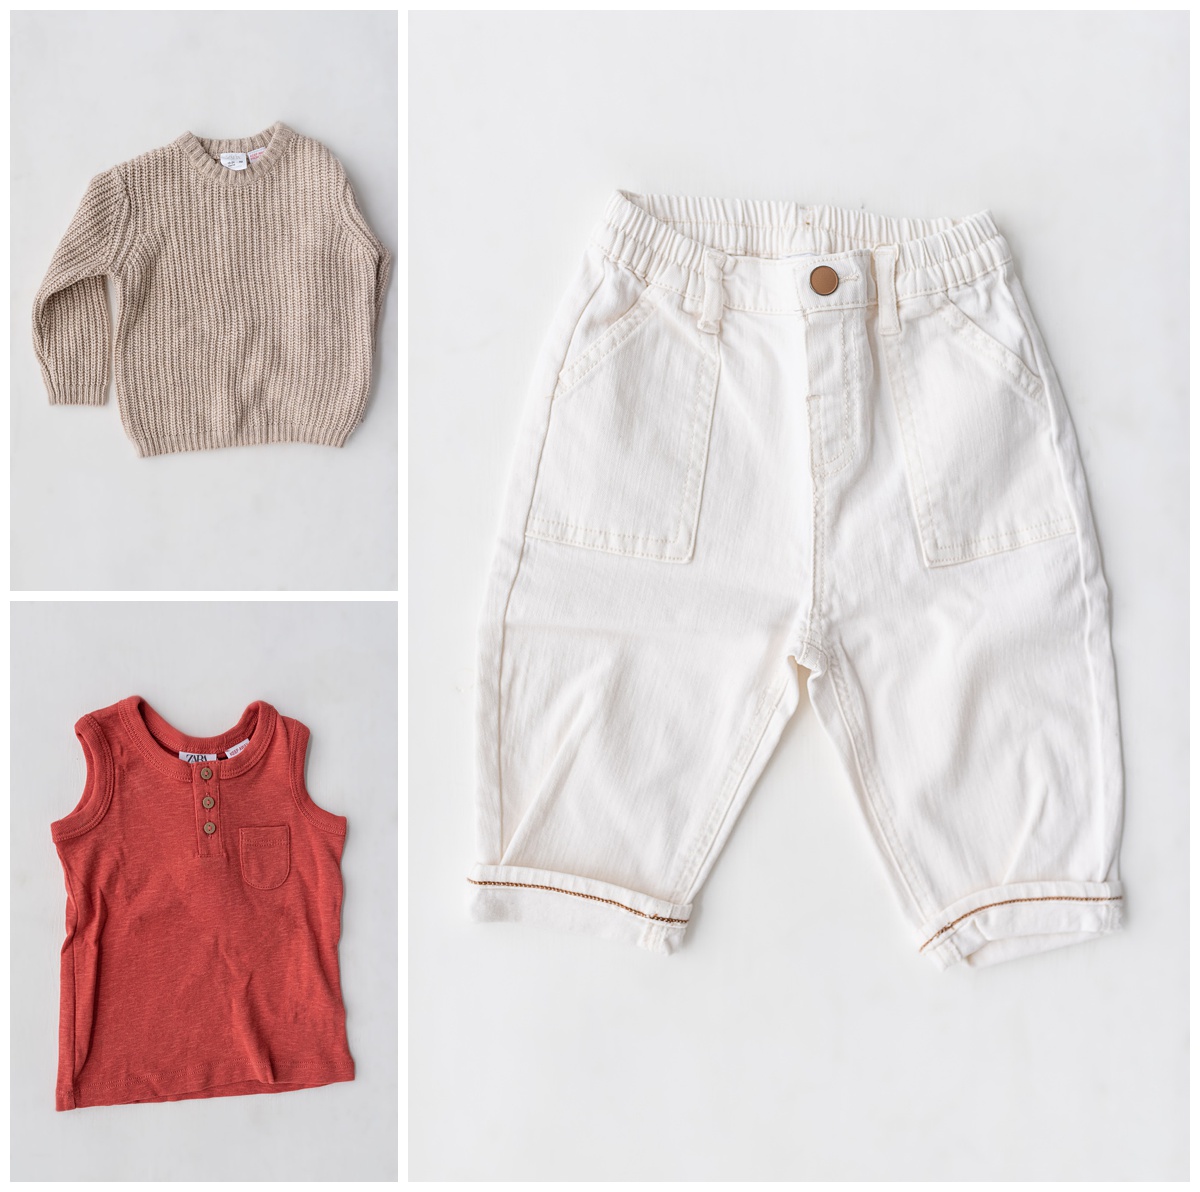 details of red, cream, and white boy clothes in the studio wardrobe